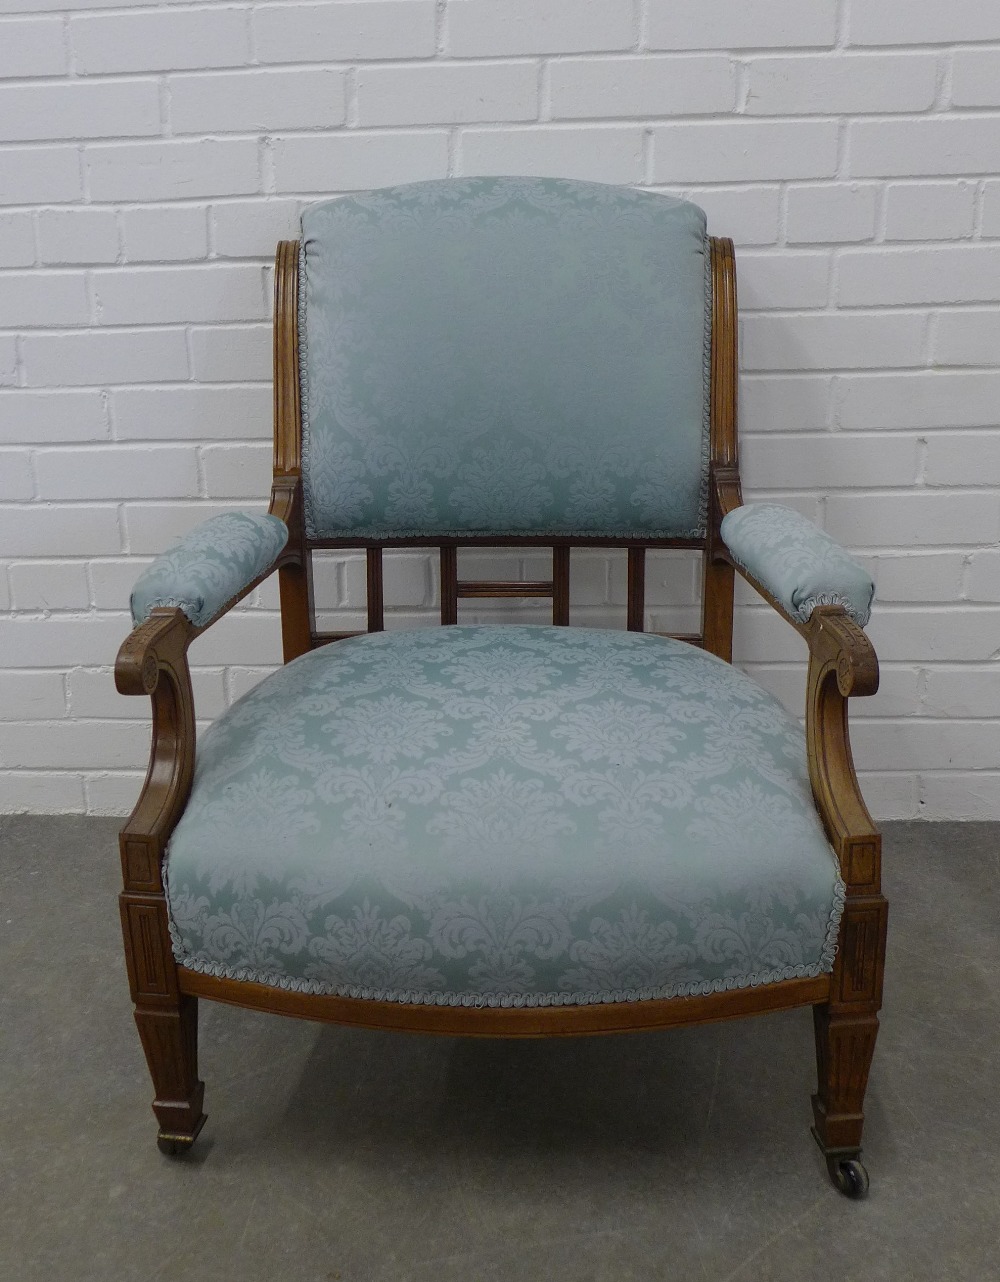 Late 19th / early 20th century mahogany framed armchair with pale blue damask upholstery, with - Image 2 of 3